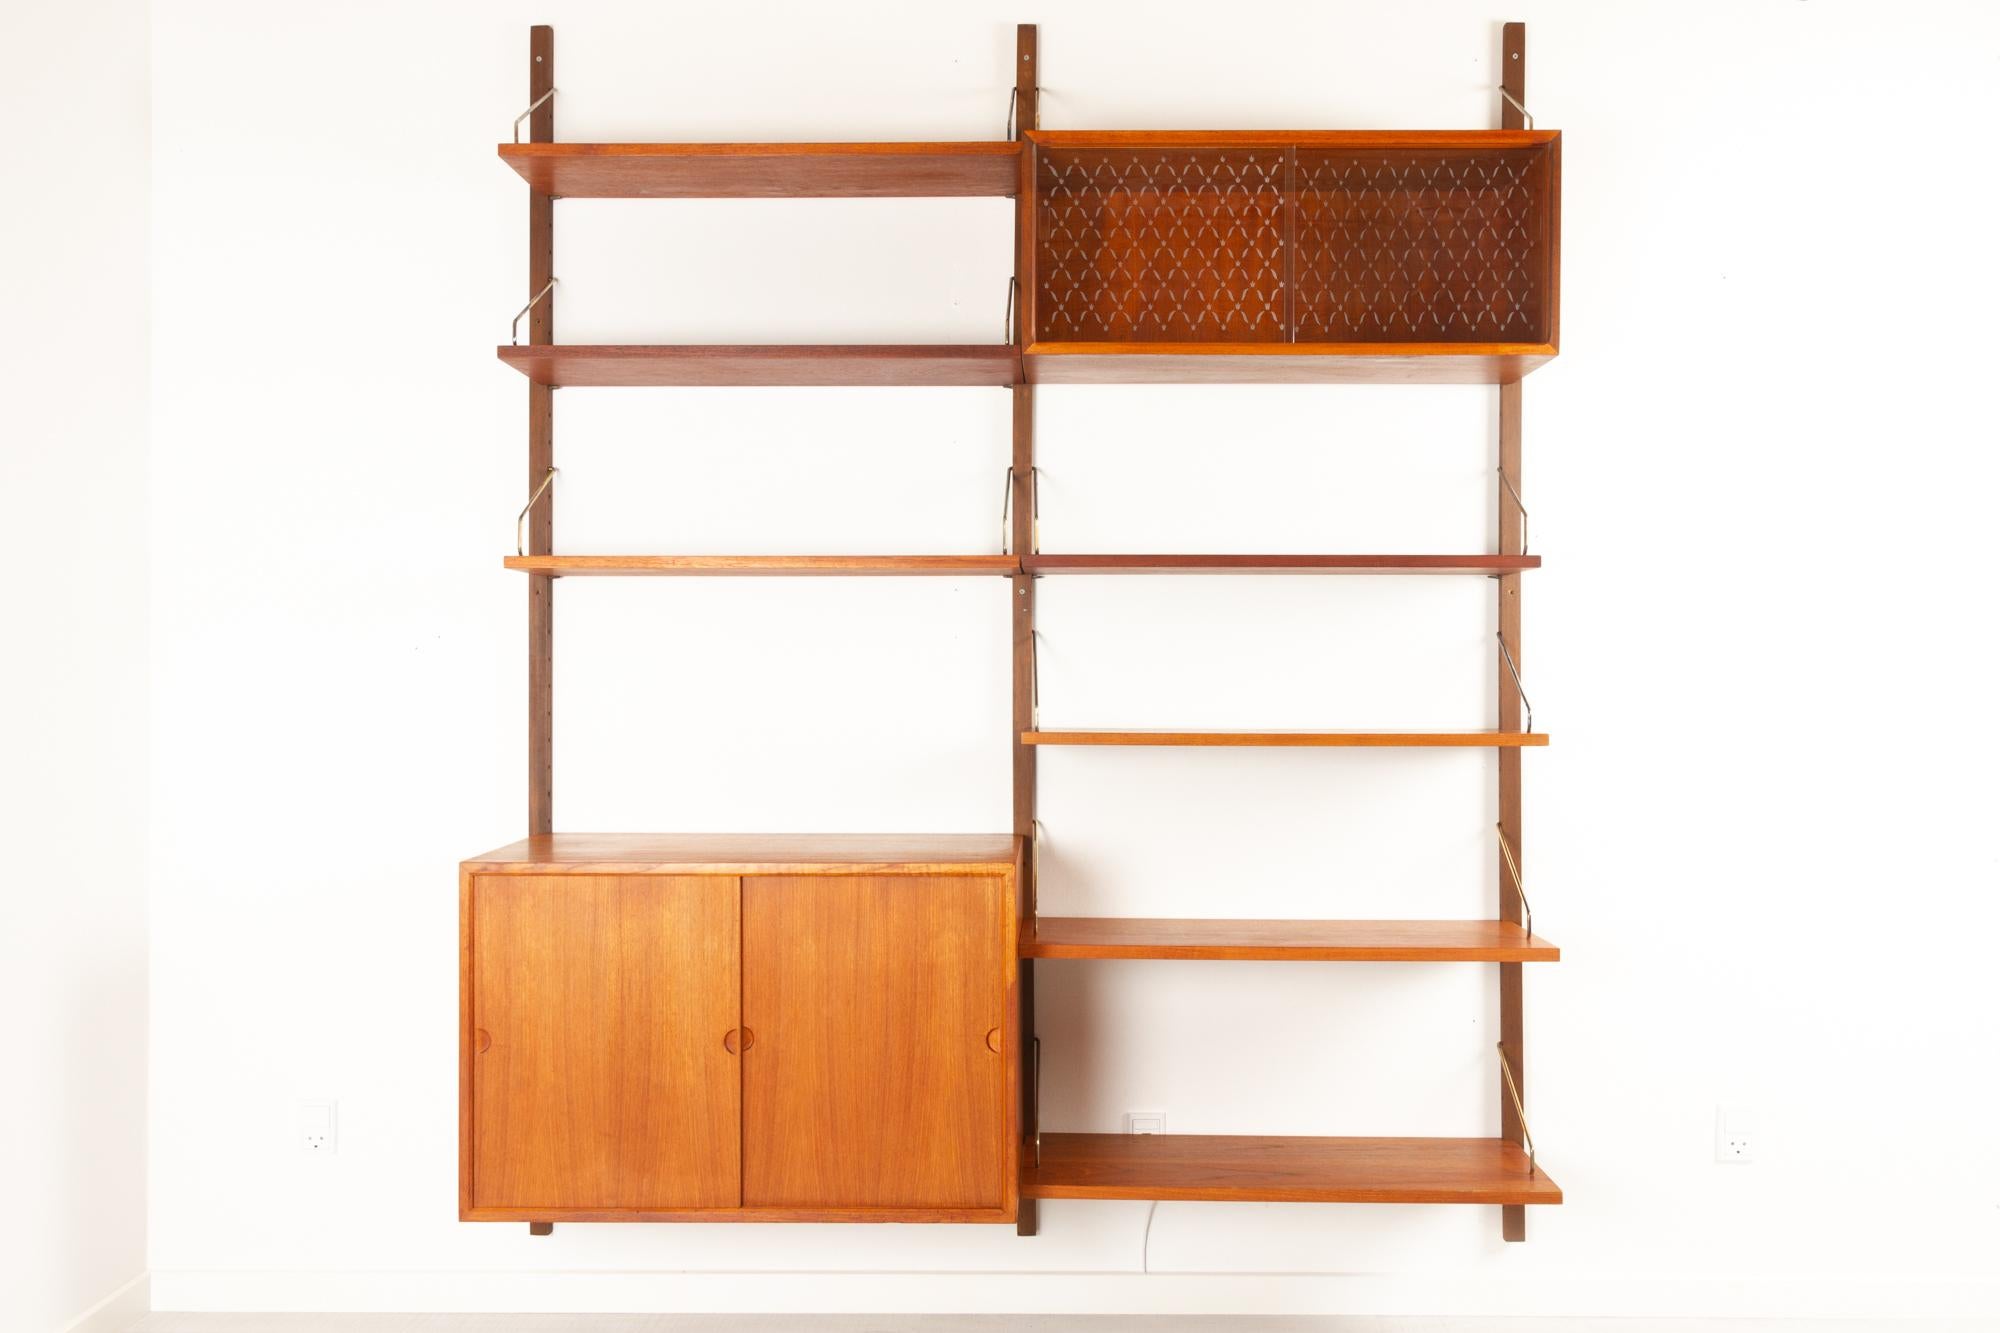 Vintage Danish teak wall unit by Poul Cadovius for Cado, 1950s.
Mid-Century Modern 2 bay shelving system model Royal. This is a original vintage shelving system designed in 1948 by Danish architect Poul Cadovius. 
Cadovius had the revolutionary